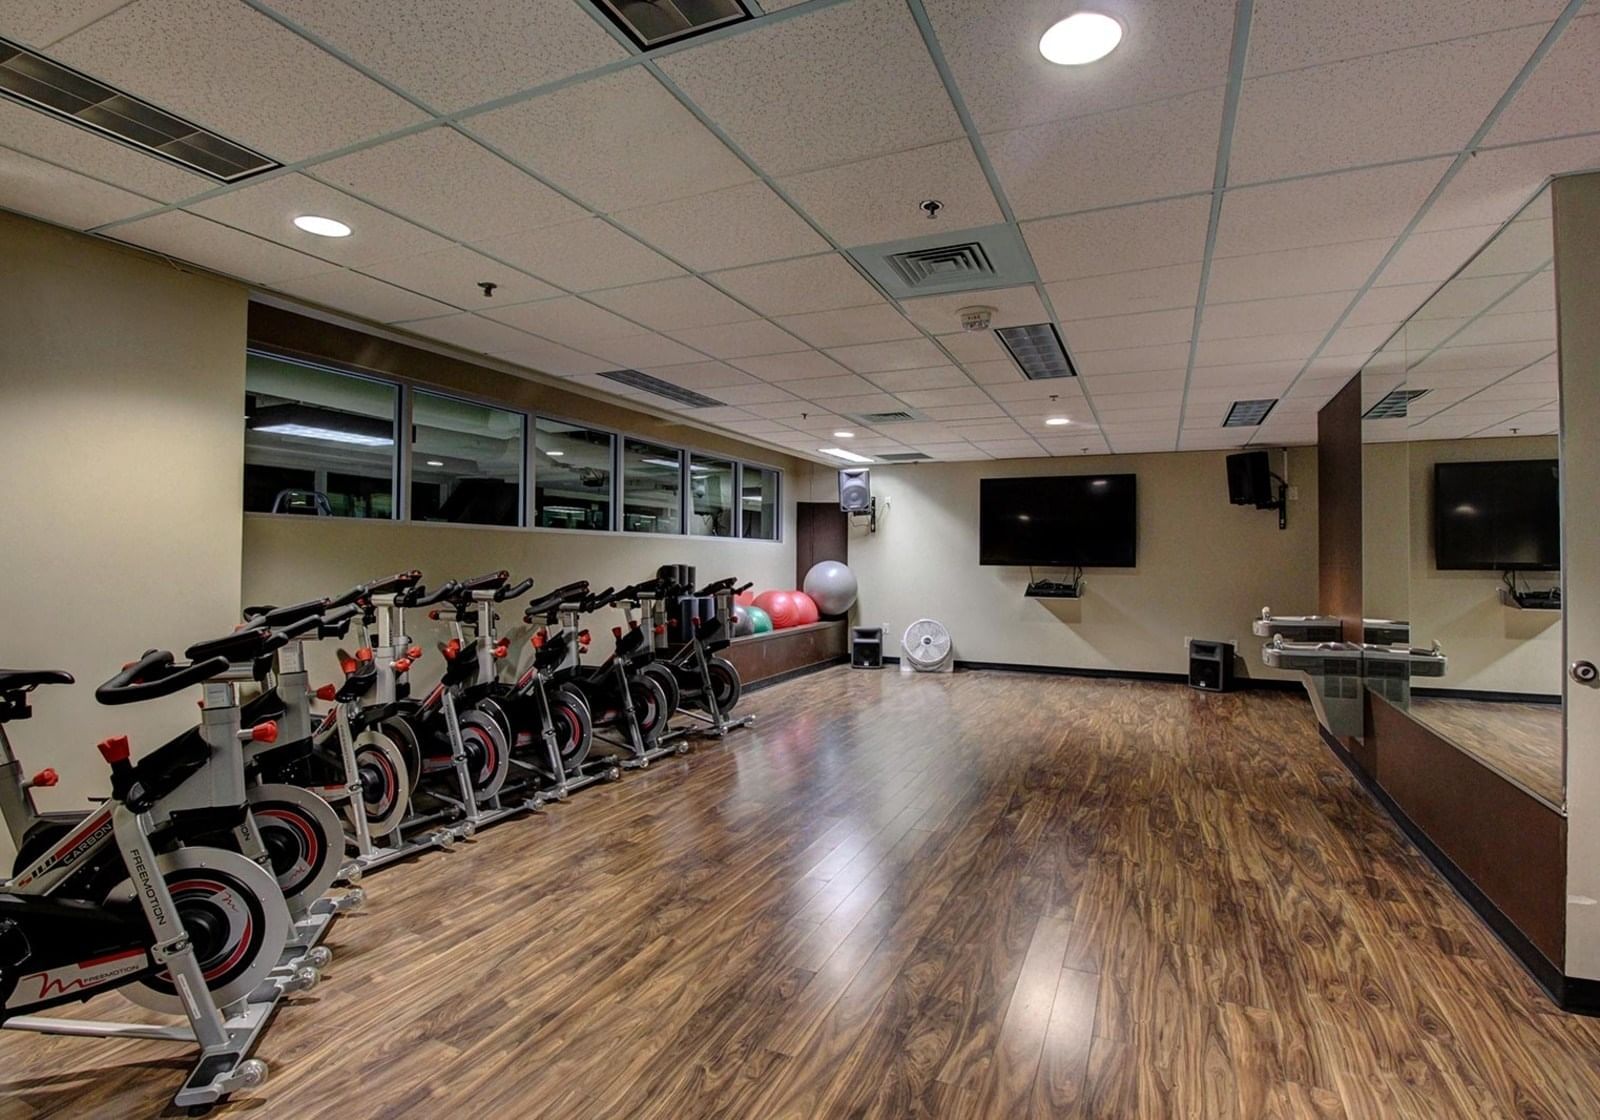 Interior of the fitness center at The Grove Hotel